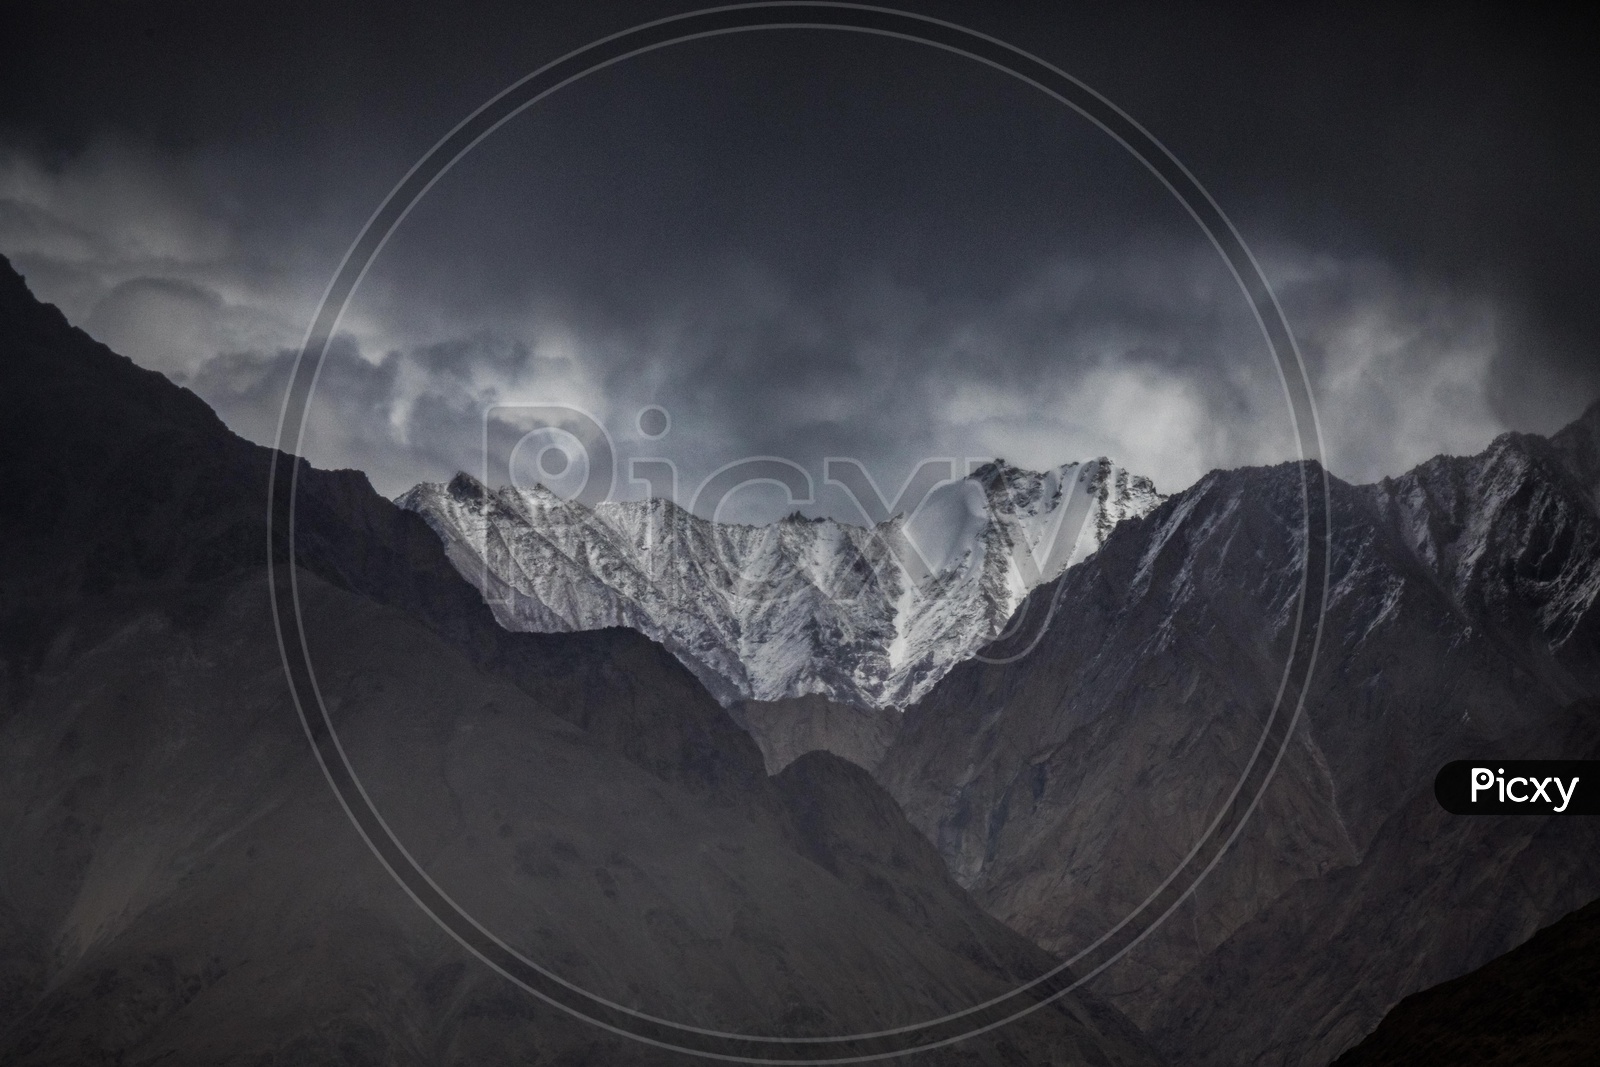 Dark clouds covered snow capped Himalayan Ranges